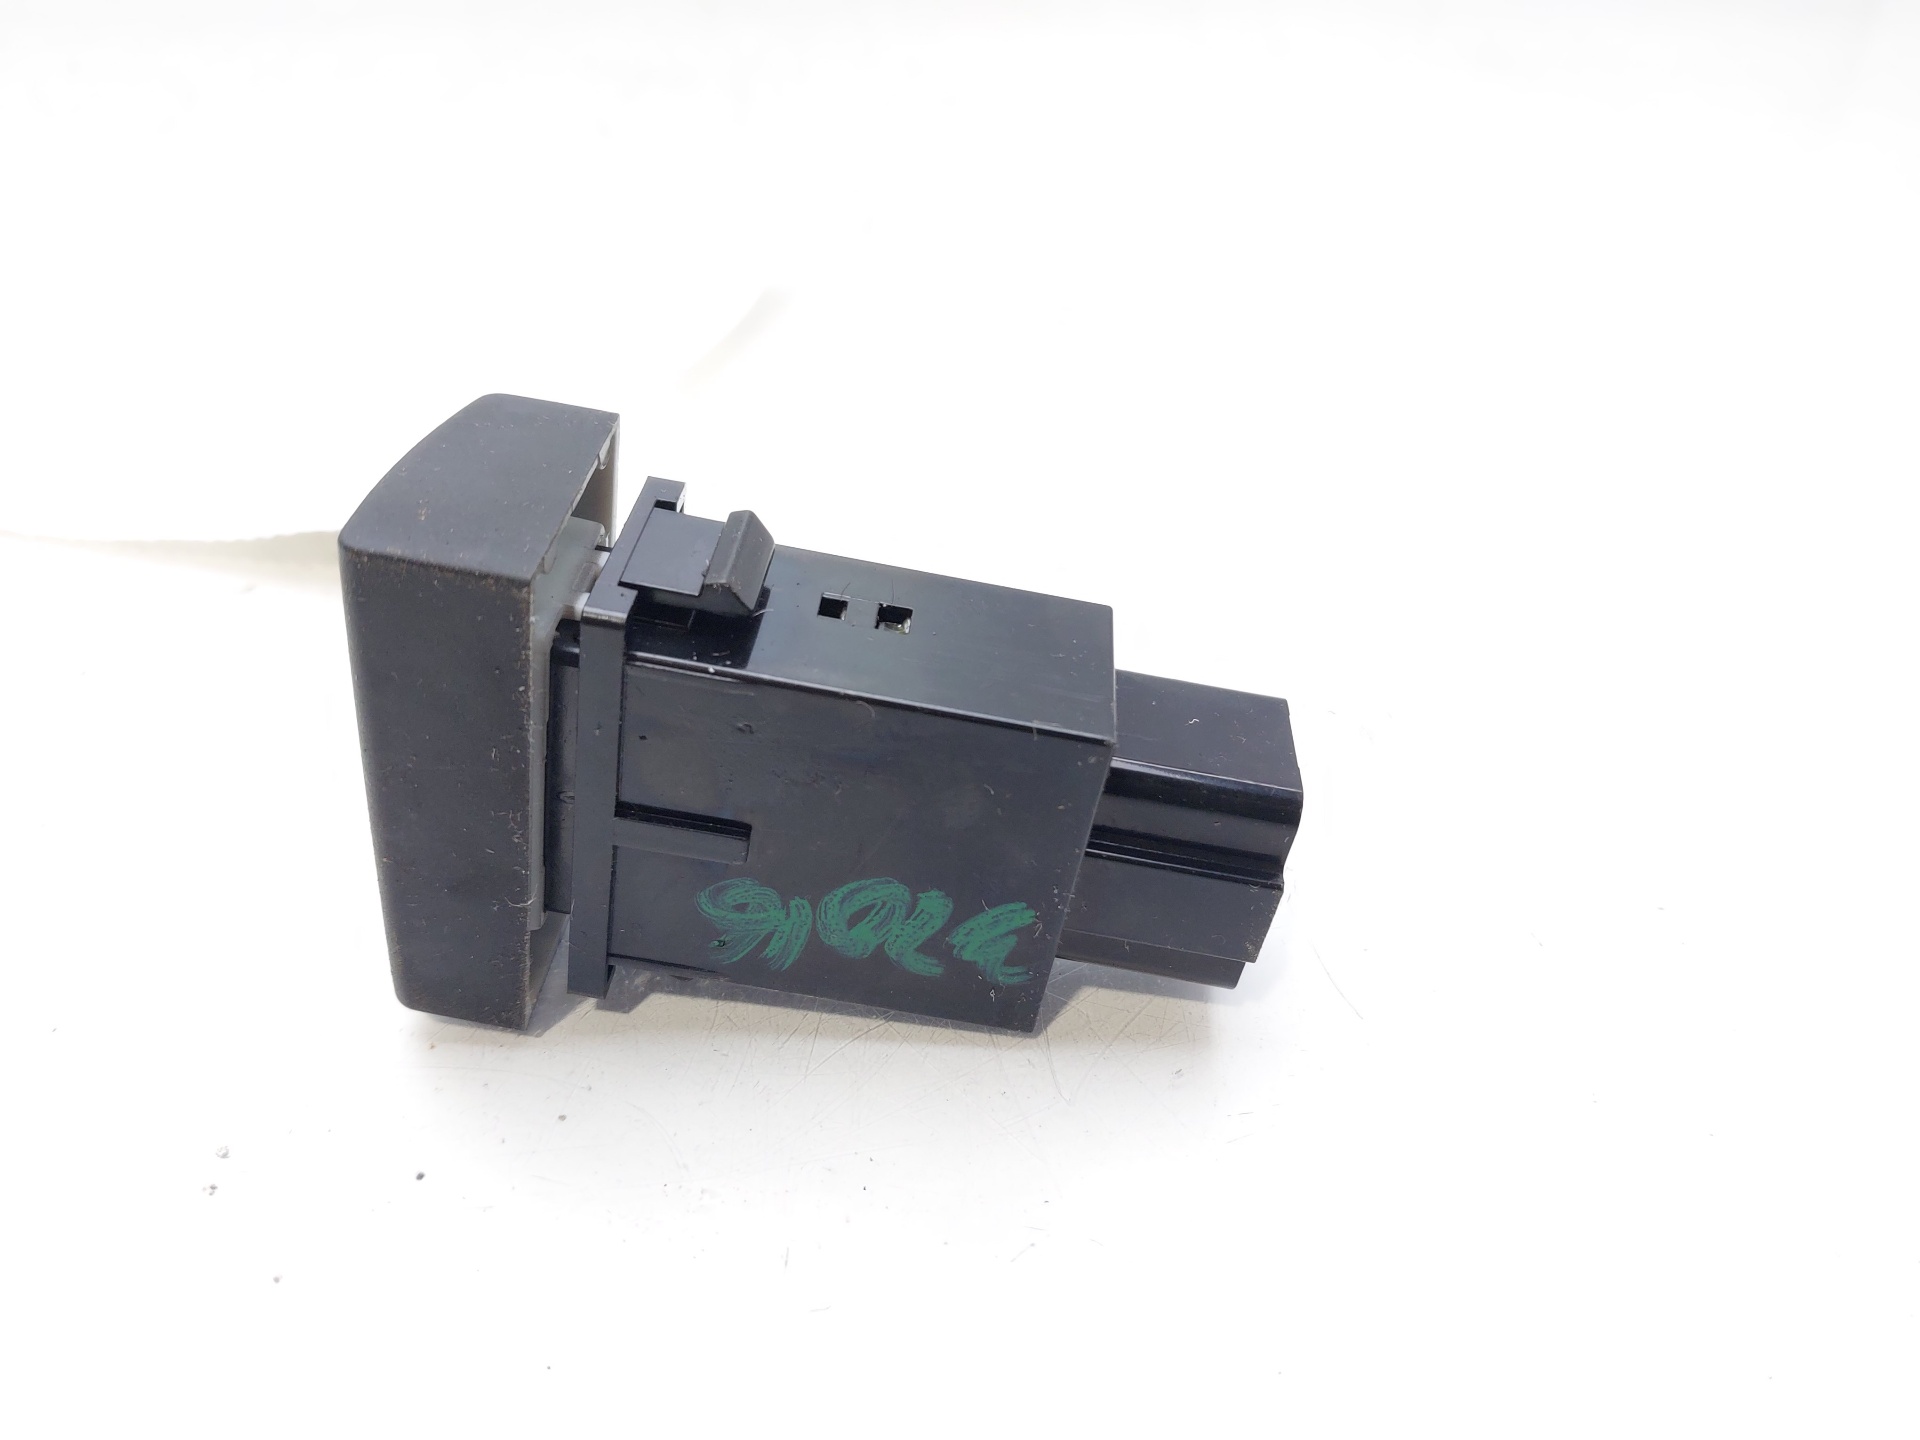 SSANGYONG Rexton Y200 (2001-2007)  Fog light switch 864W02500 23056372